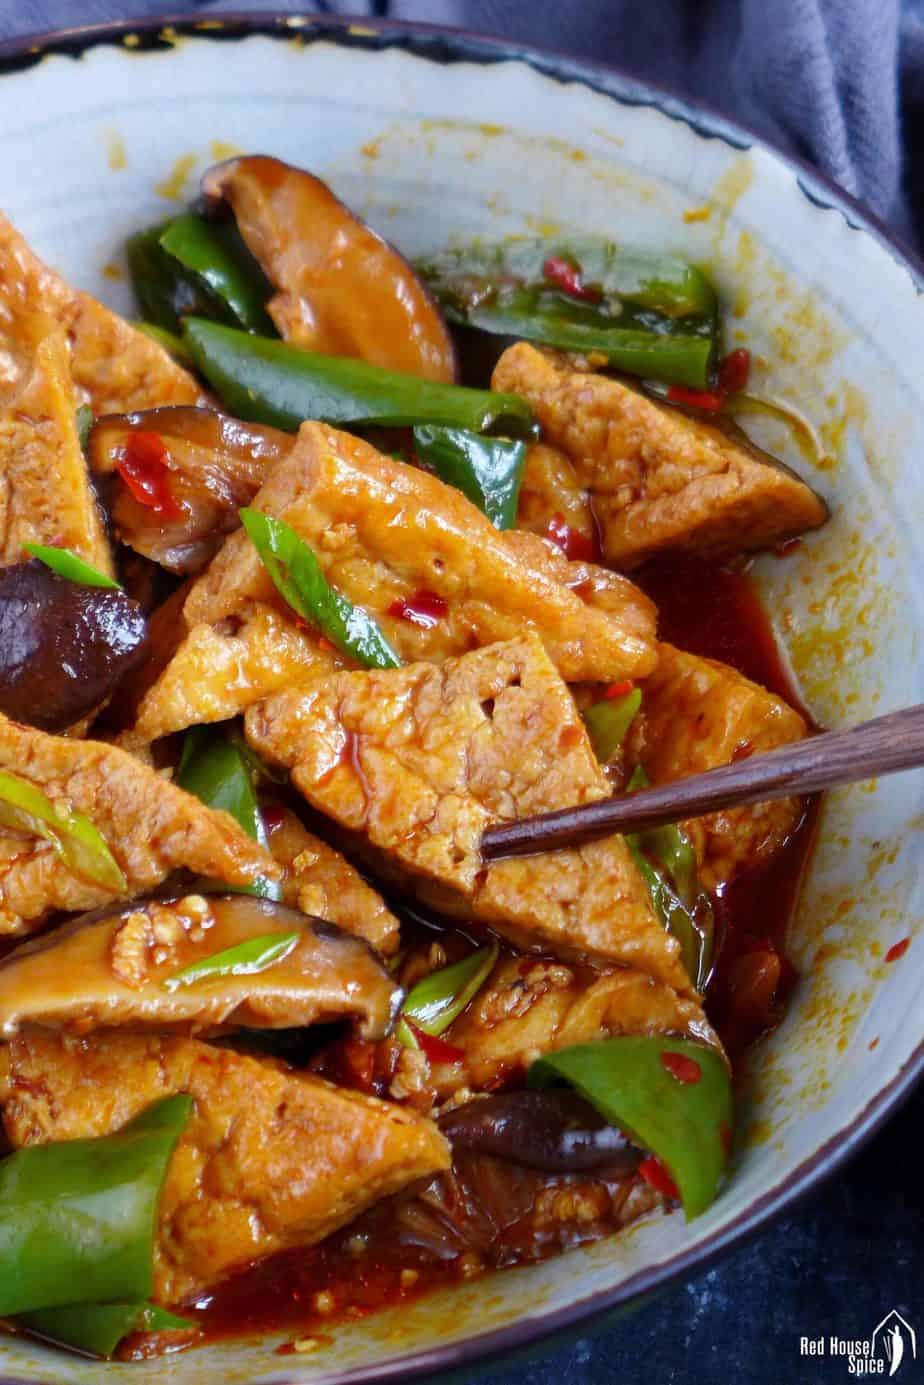 fried and braised tofu in Sichuan style